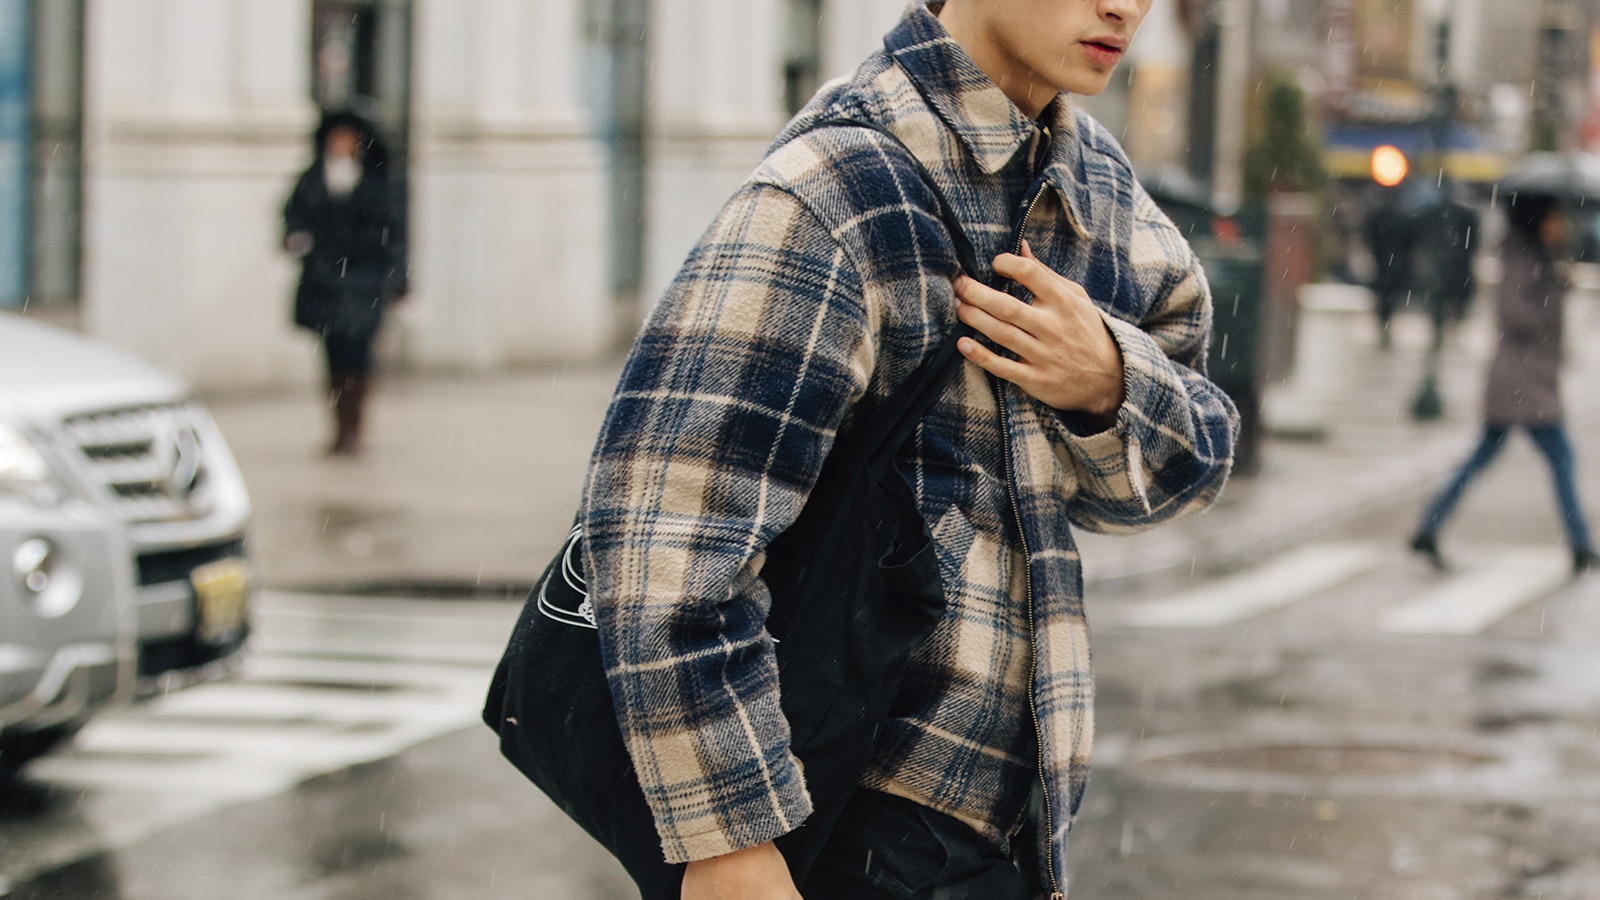 How To Wear Checks, Tartans And Plaid | The Journal | MR PORTER